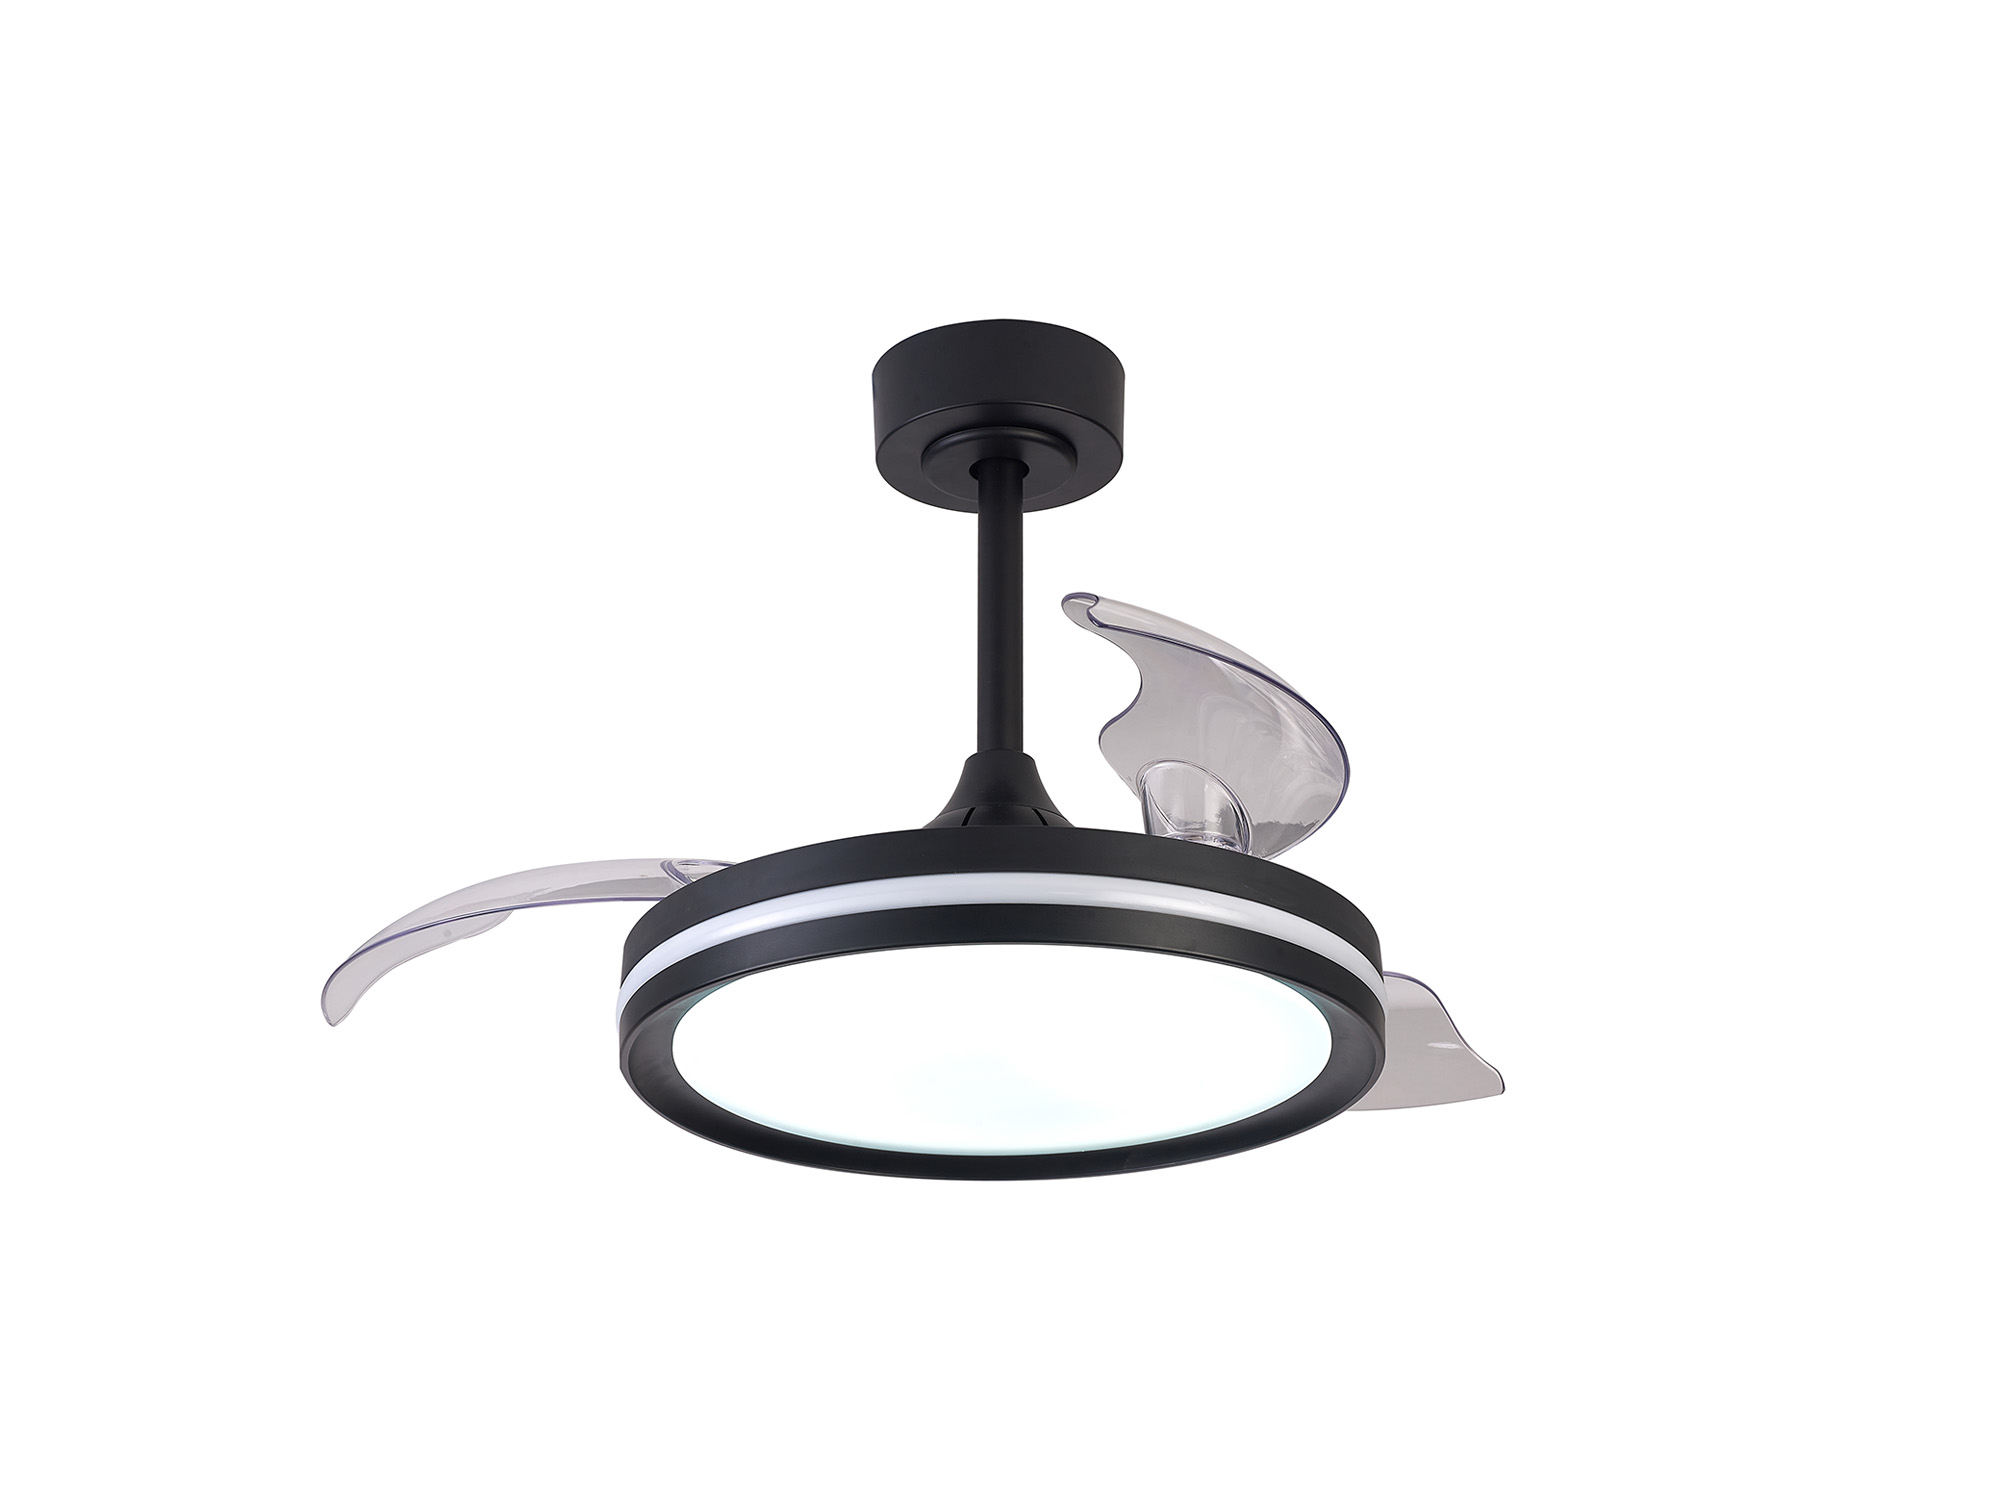 M8730  North 40W LED Dimmable White/RGB Ceiling Light With Built-In 28W DC Reversible Fan, Remote Control 3000-6500K, Black